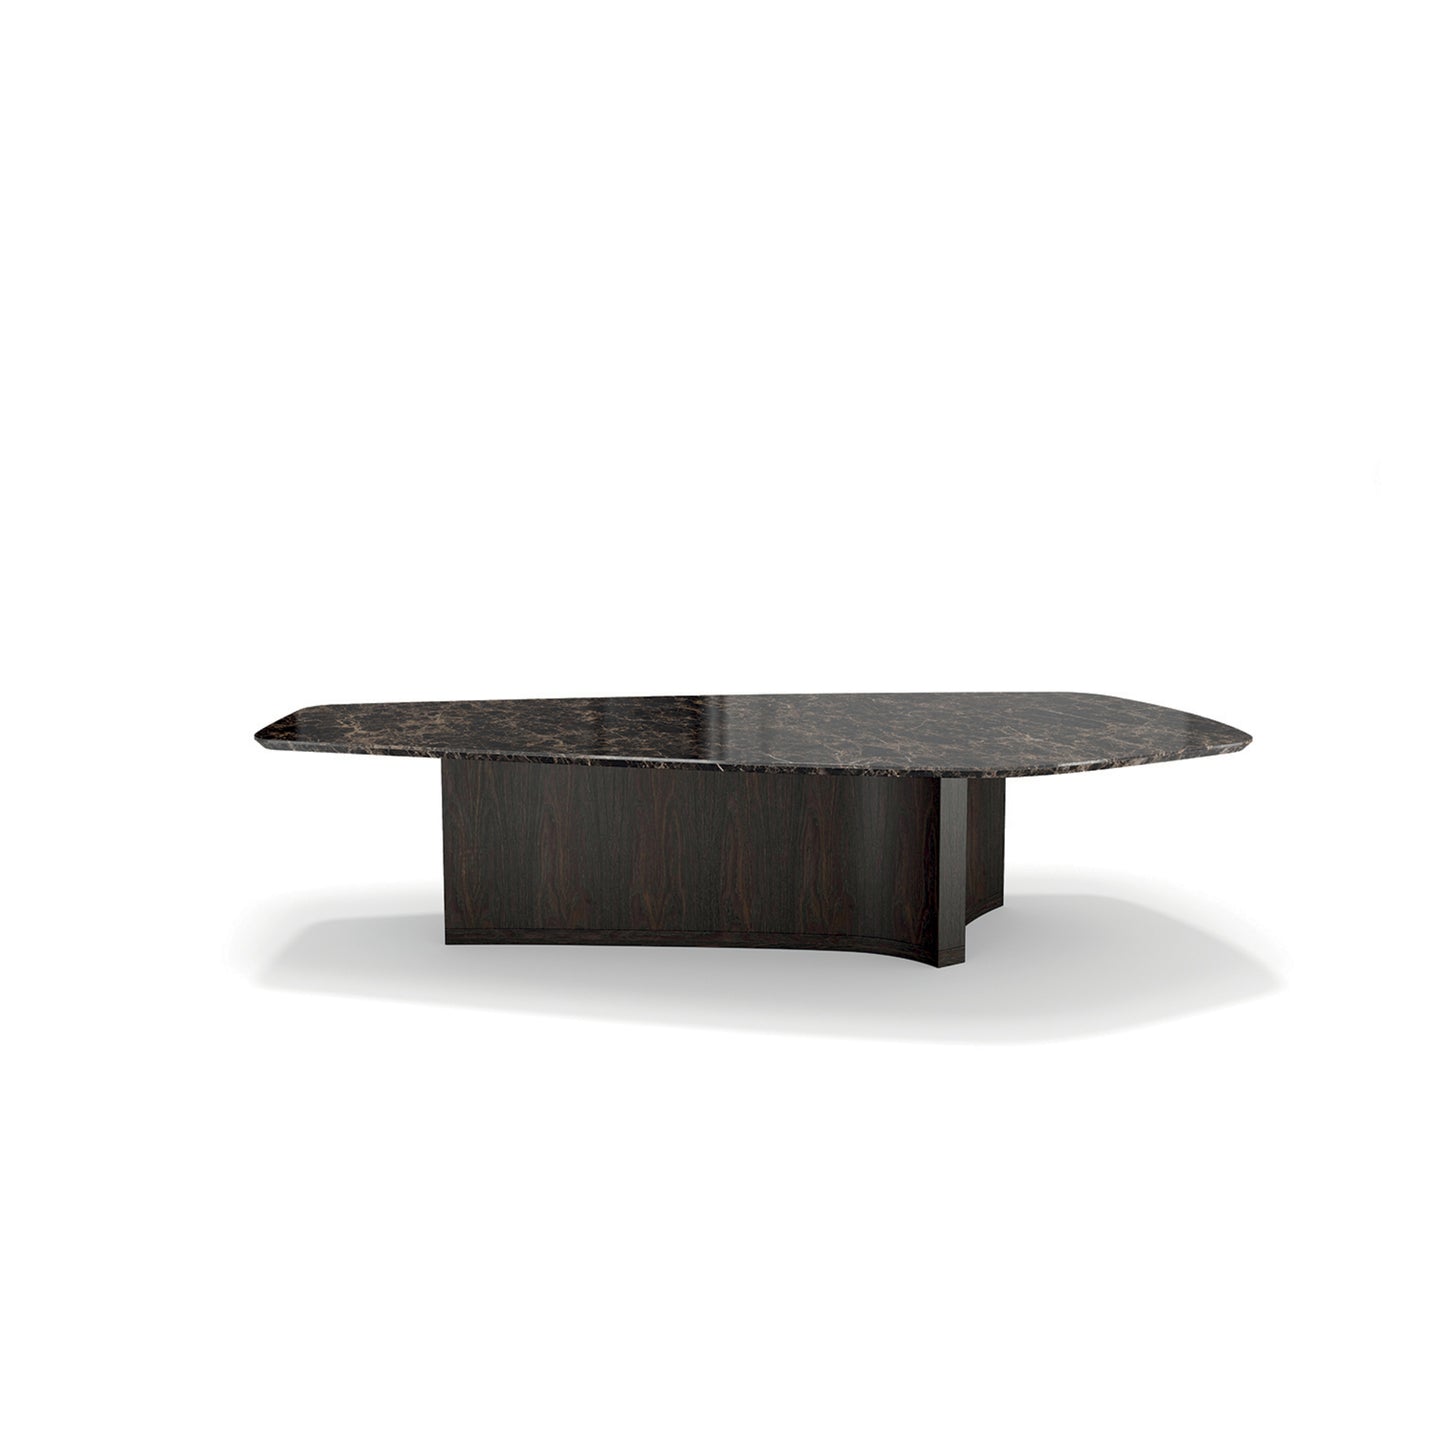 MR | Dining table by Emmemobili